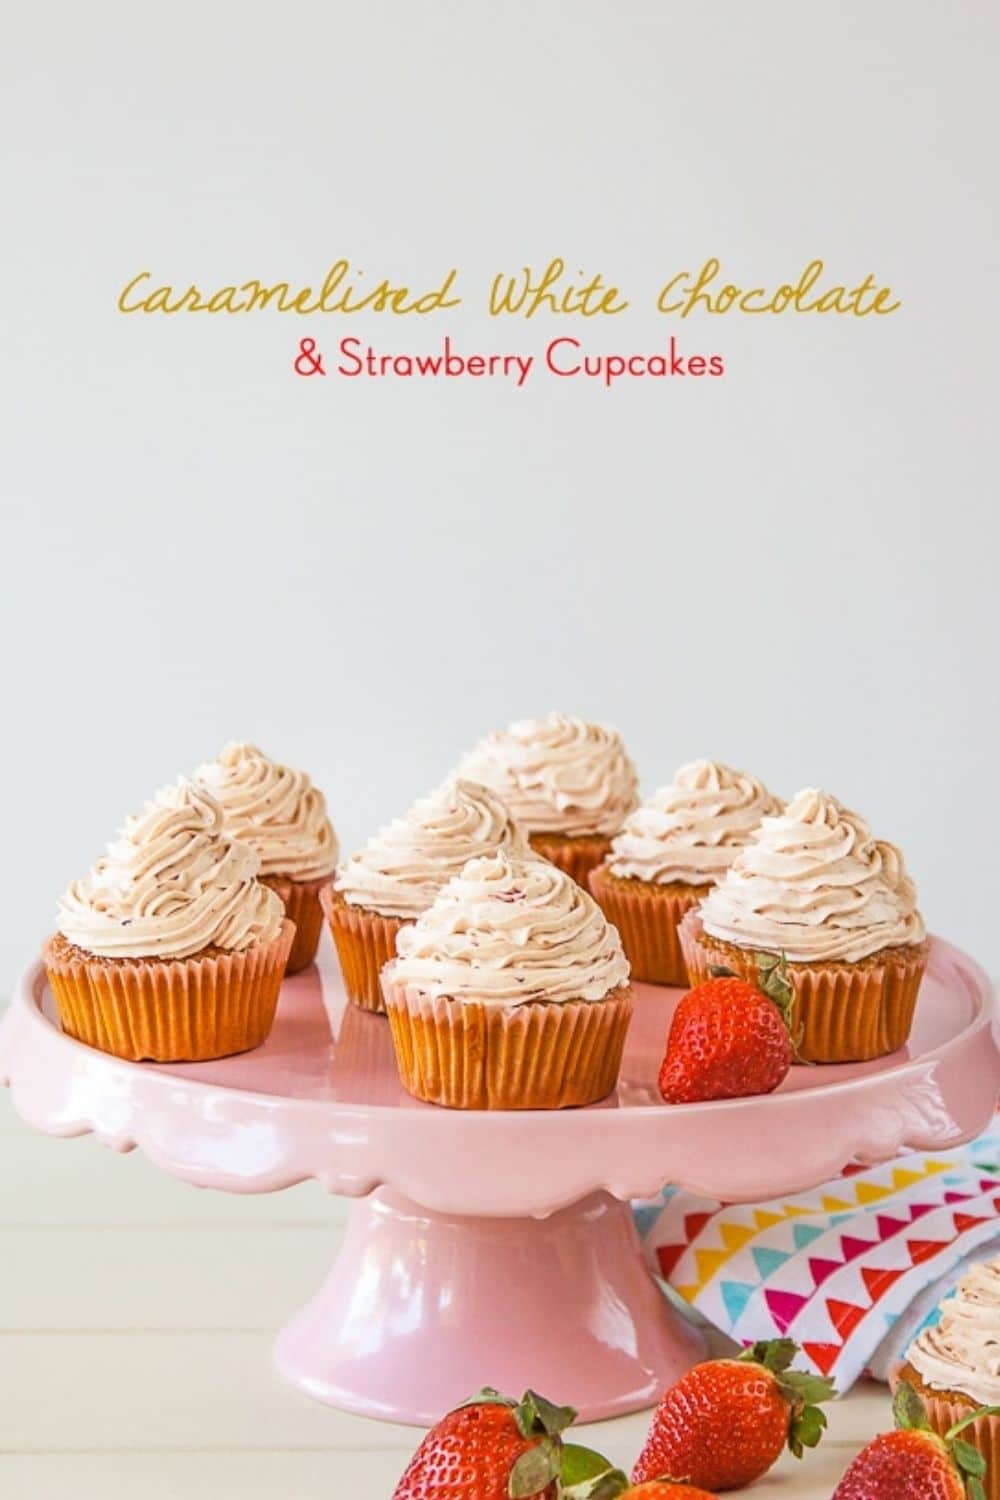 Strawberry Cupcakes with Caramelized White Chocolate